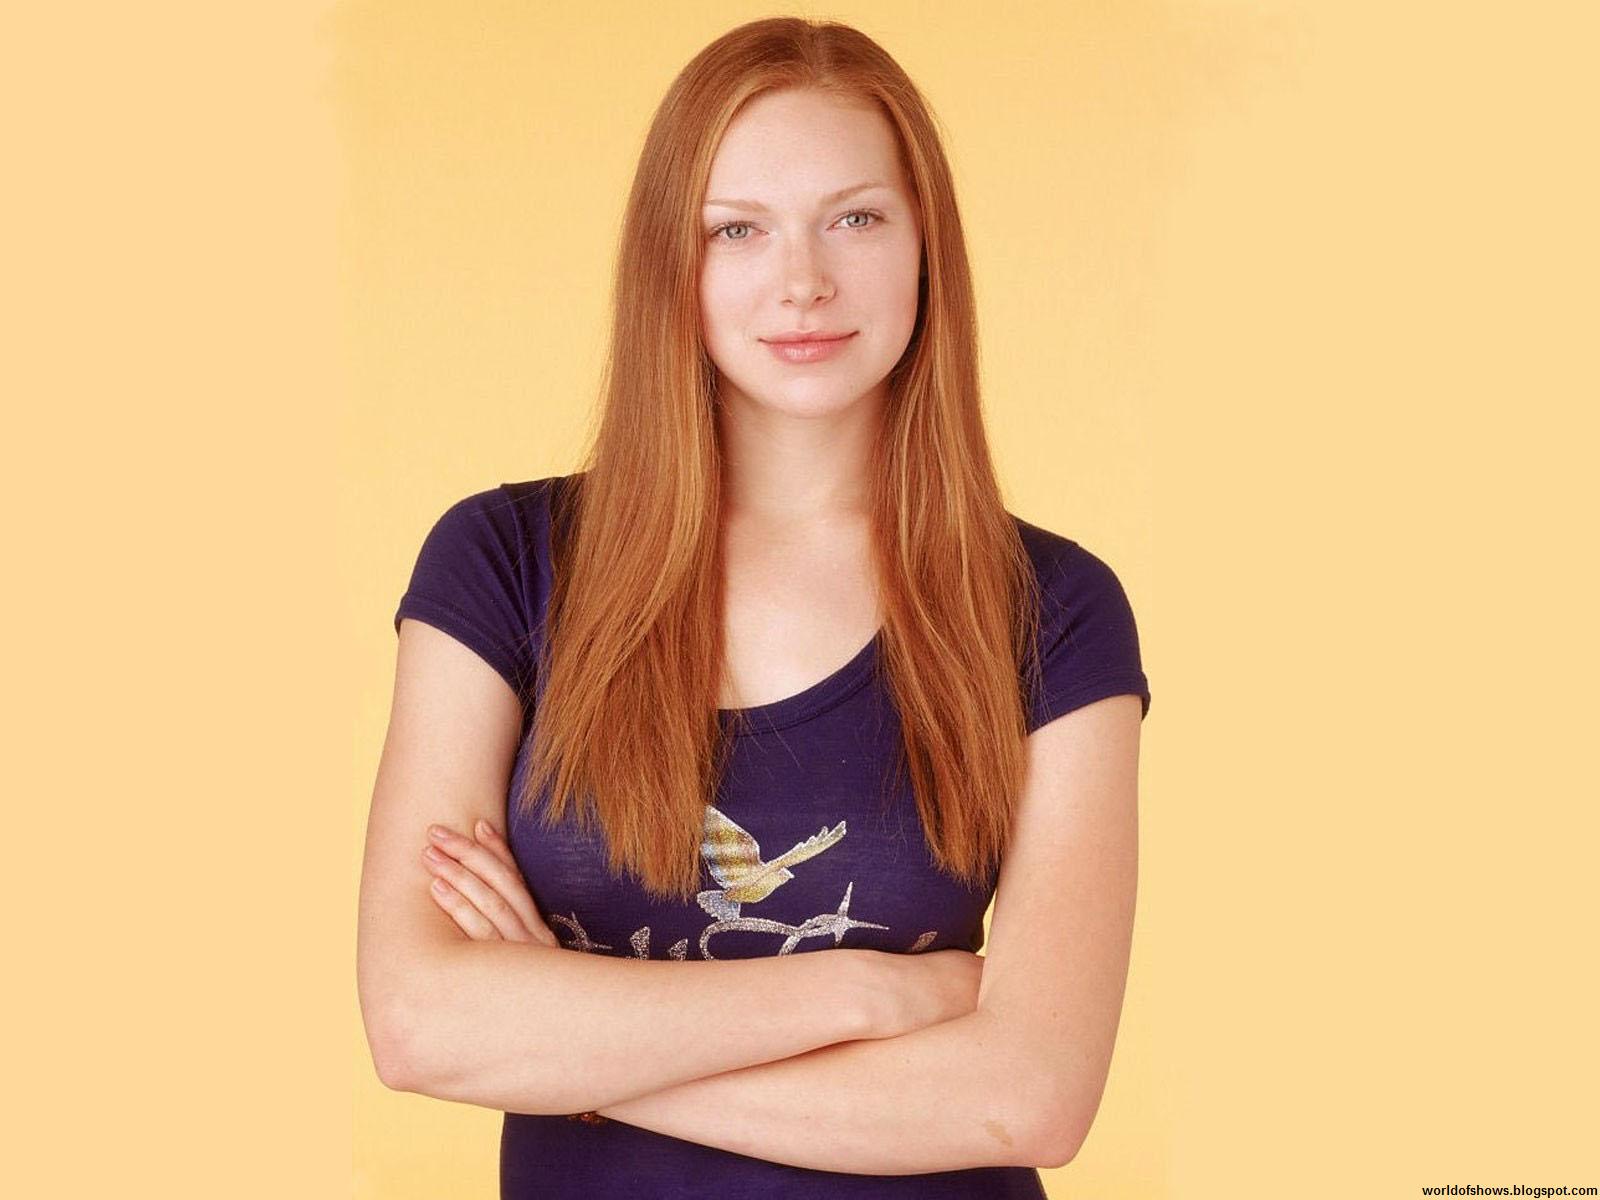 Laura Prepon Red Haired Beautiful Lady Smiling Face American Actress Image Gallery and ...1600 x 1200